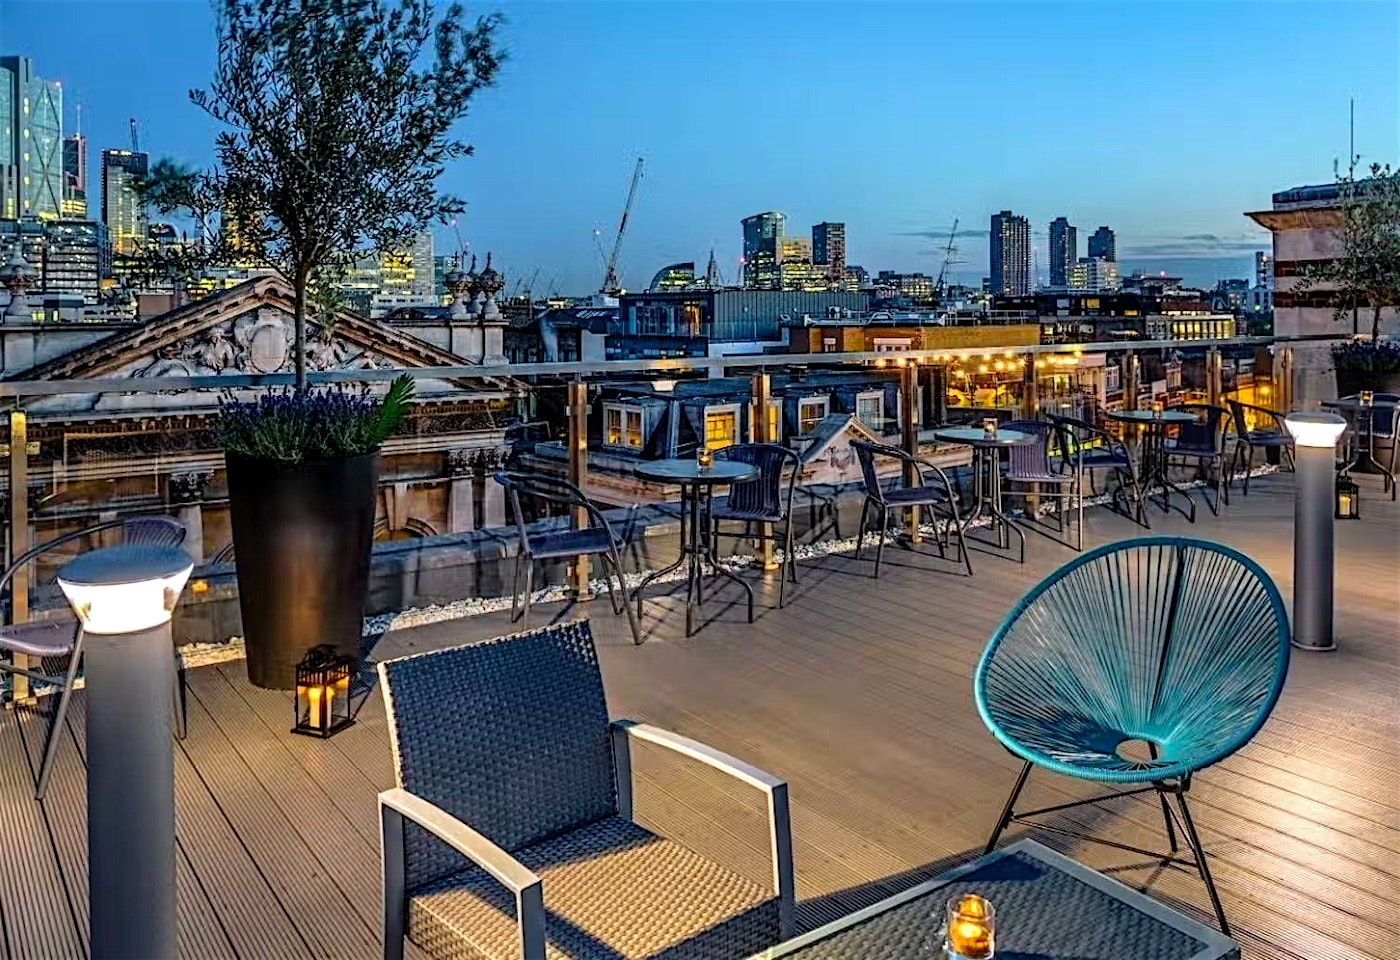 Blue hour at the Courthouse Hotel, sunset over the London skyline as seen from the roof terrace